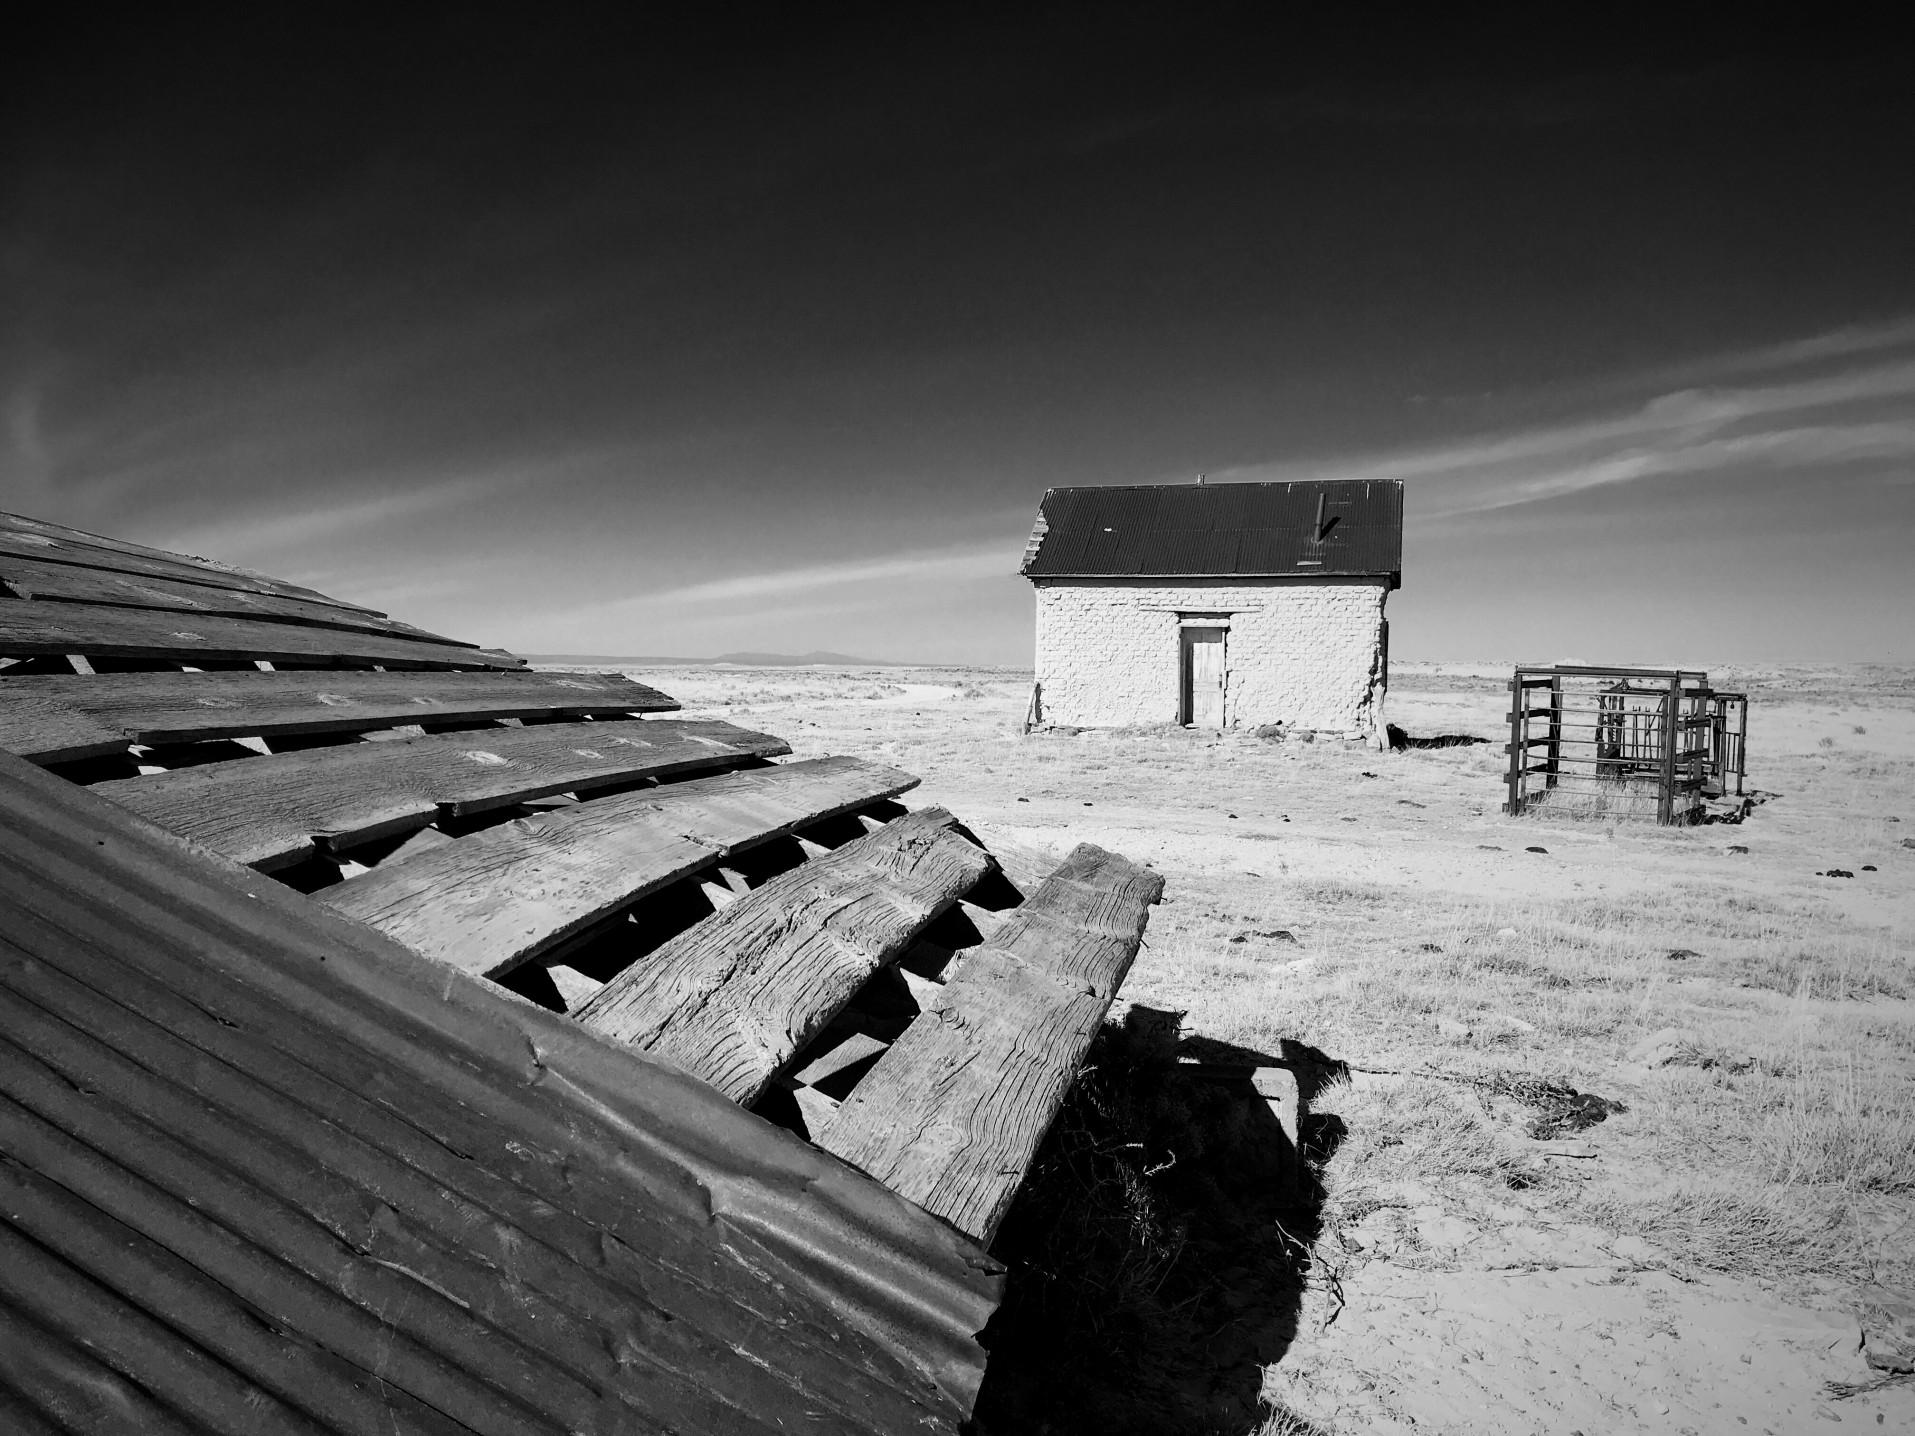 View of a small farm building and farm equipment in an empty desert.